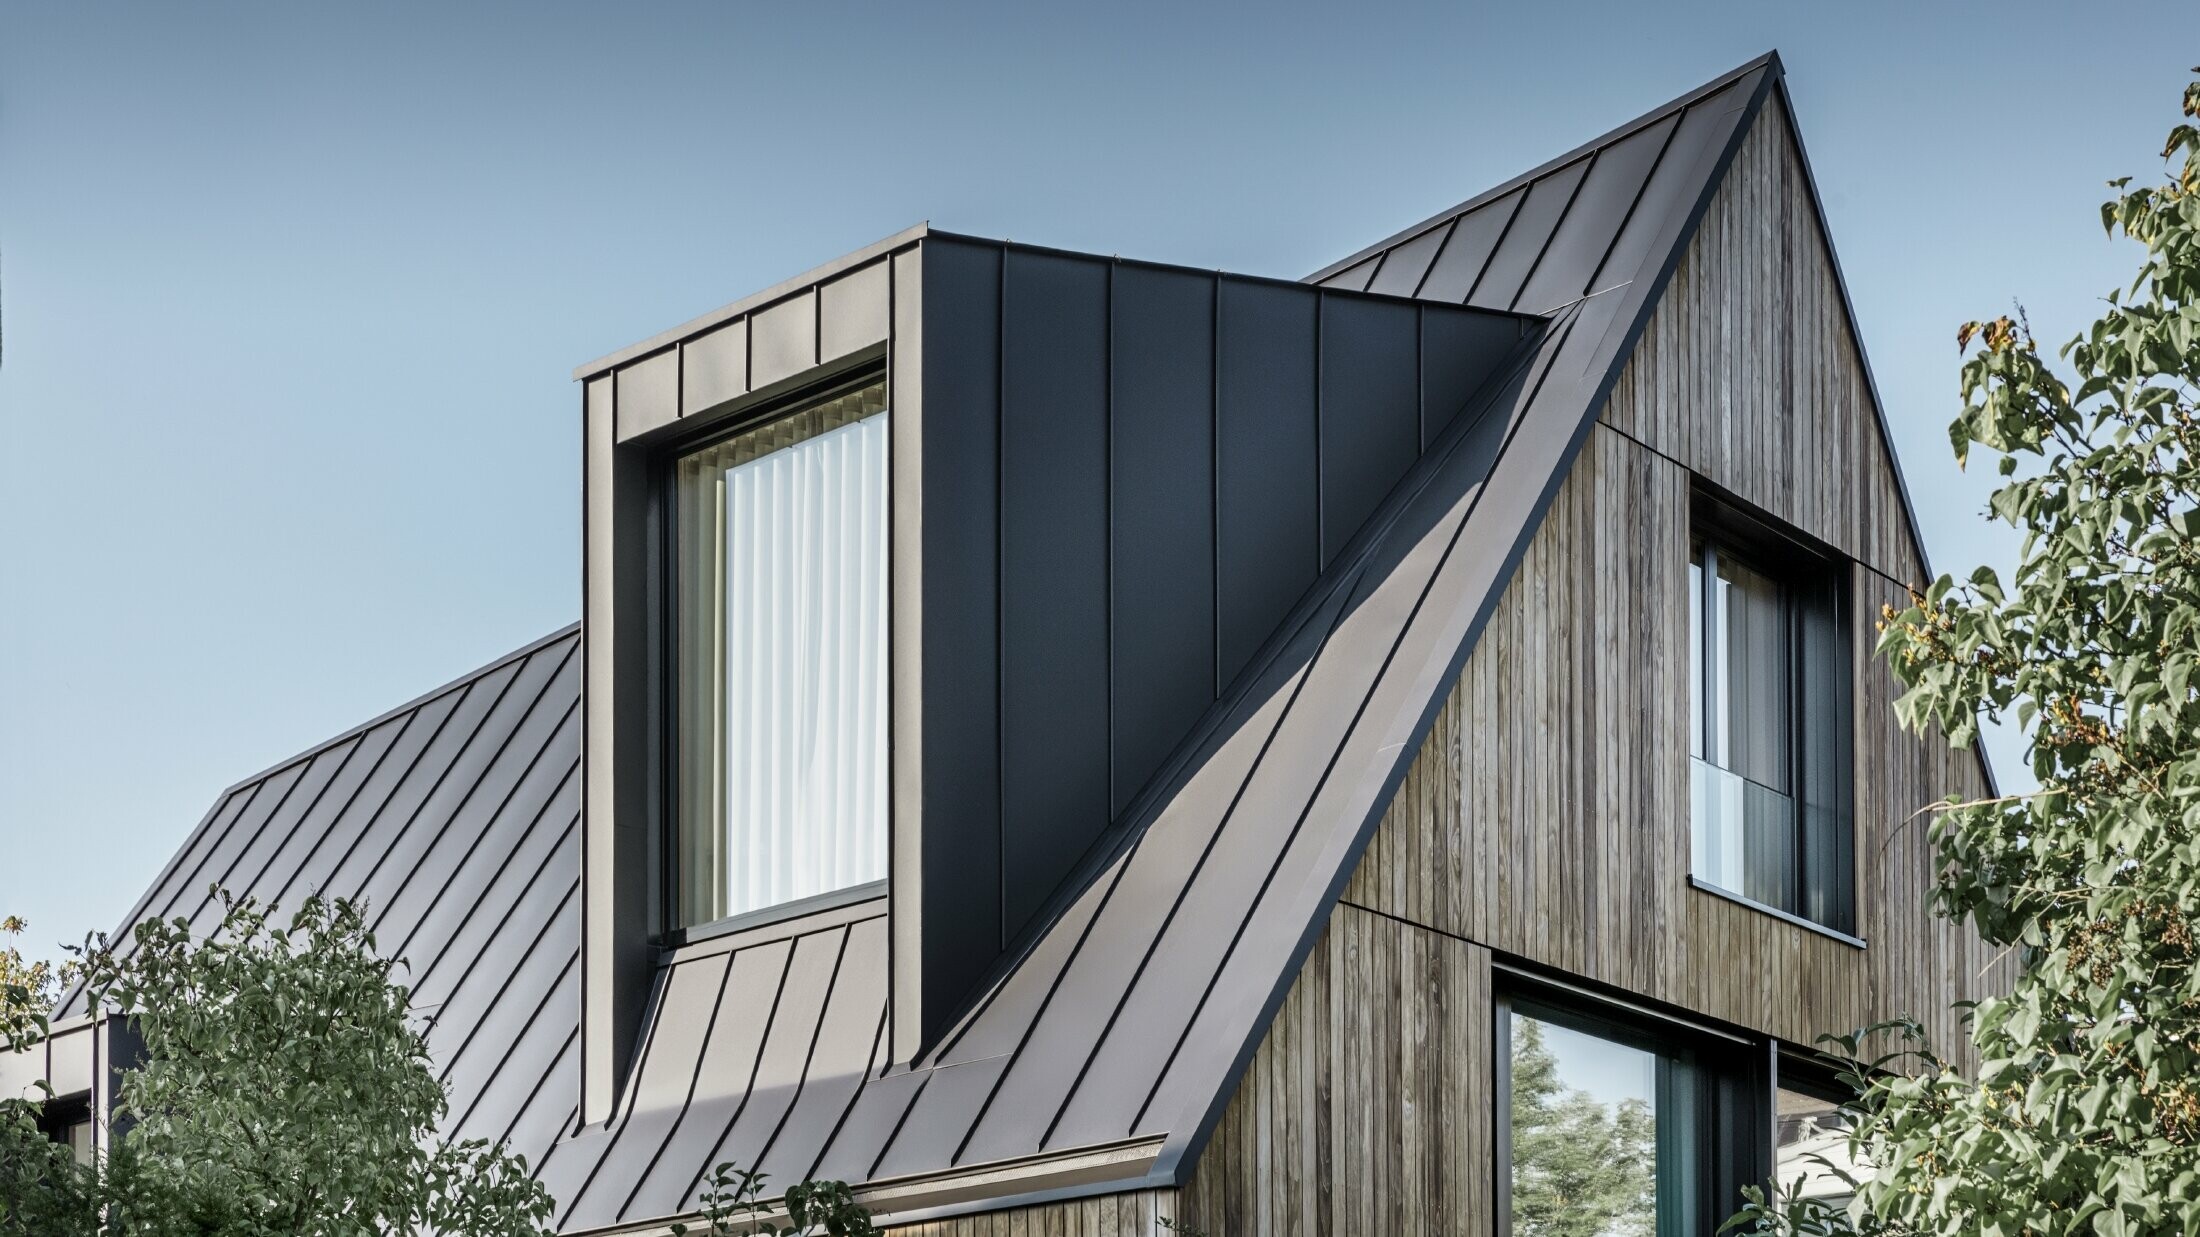 Steep gable roof with large dormer, covered with PREFALZ by PREFA in anthracite standing seam roof combined with wooden façade